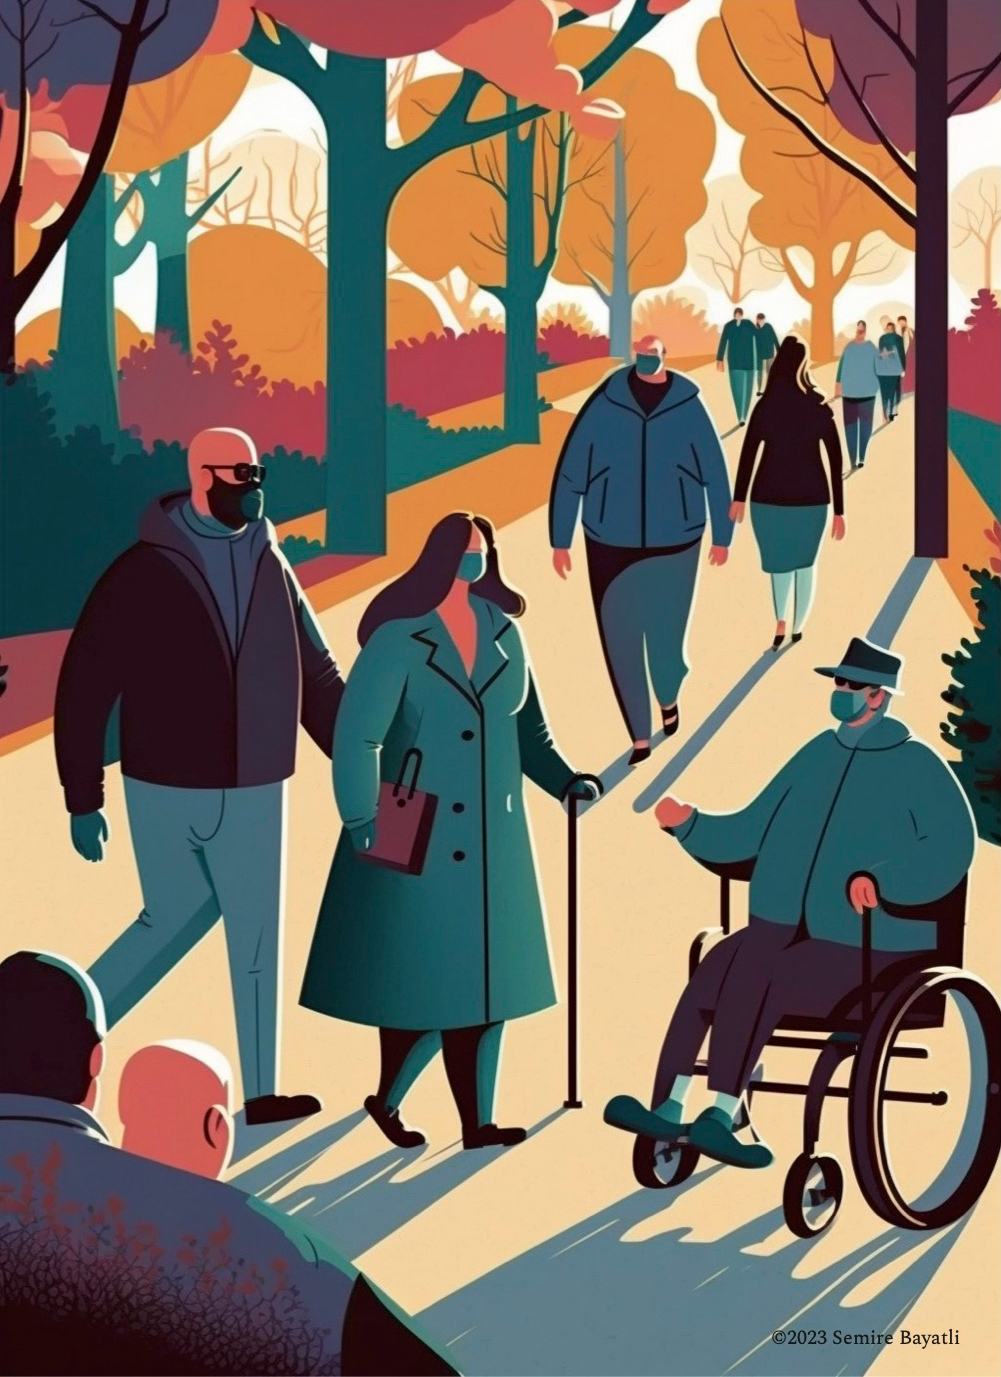 an illustration of people in a park. Some people are walking while another is in a wheelchair.